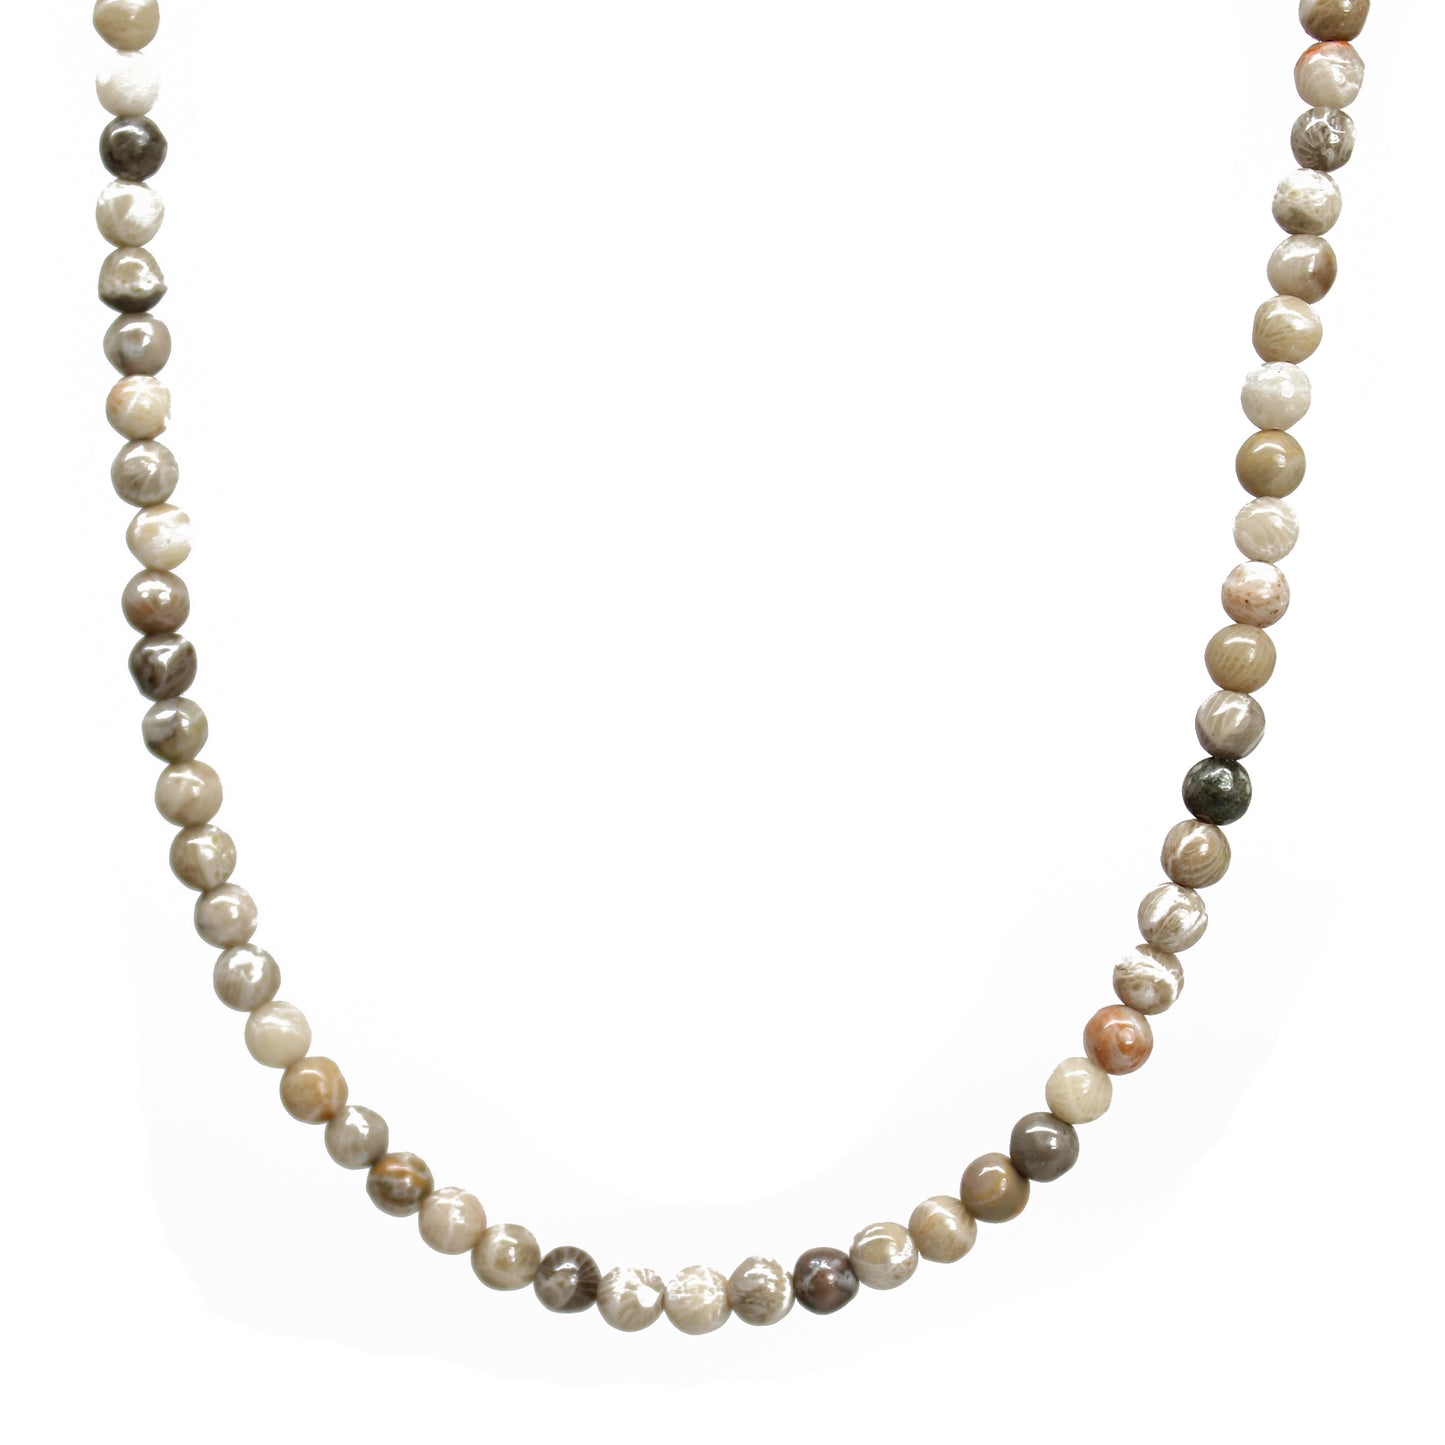 Petoskey Coral Bead Necklace Strand, Small 4mm Brown Stone Beaded Necklace